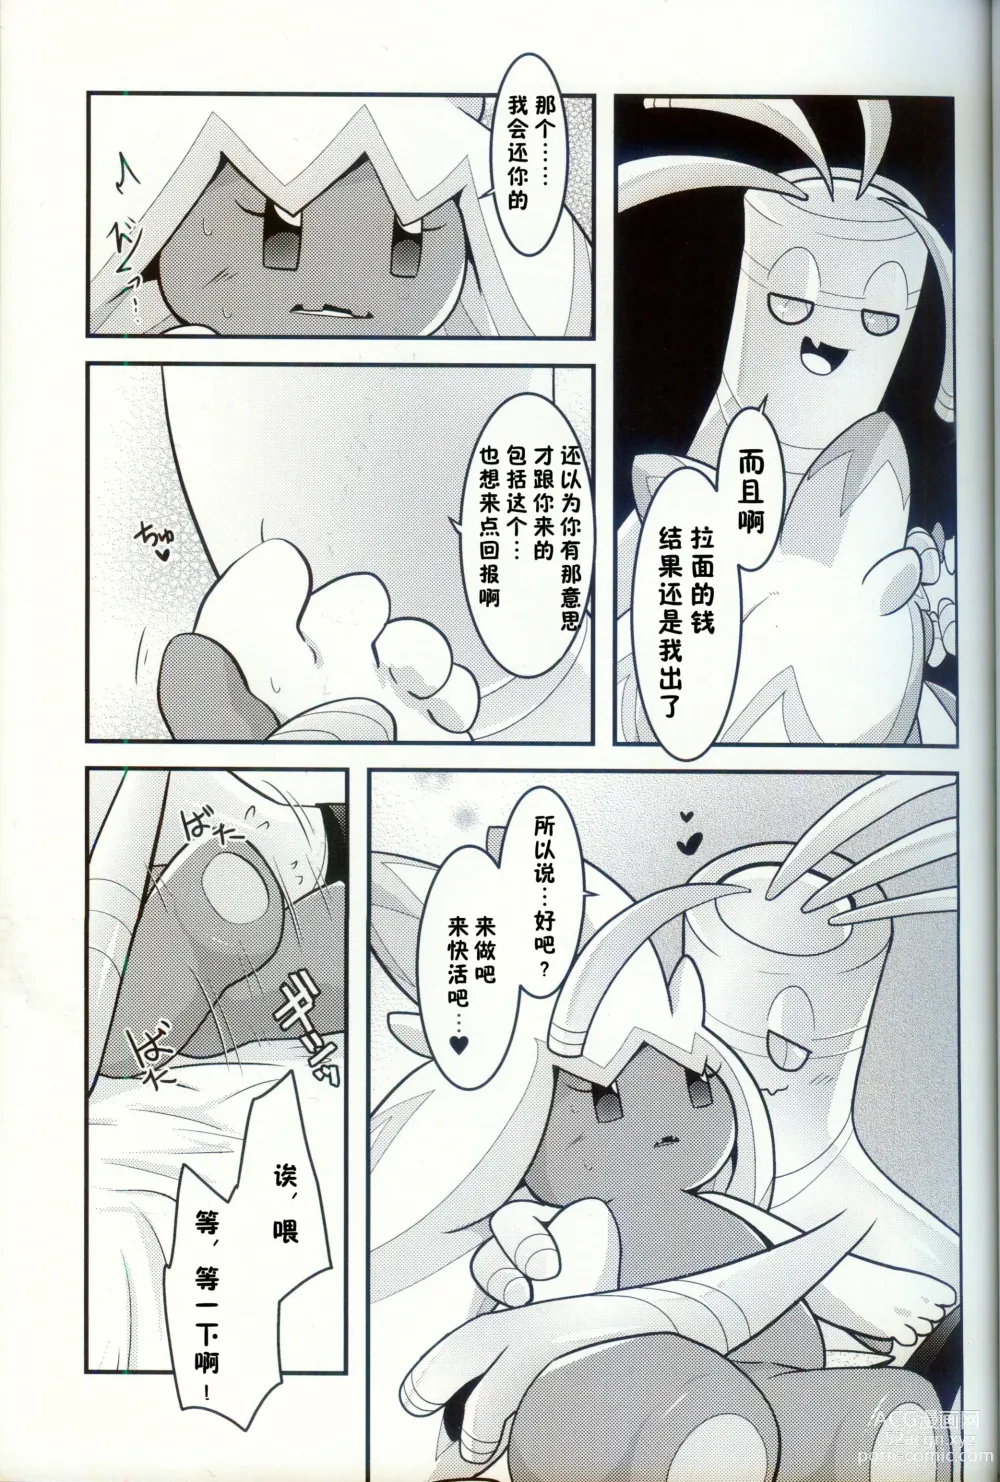 Page 16 of doujinshi 横滨的塞富豪巨锻匠